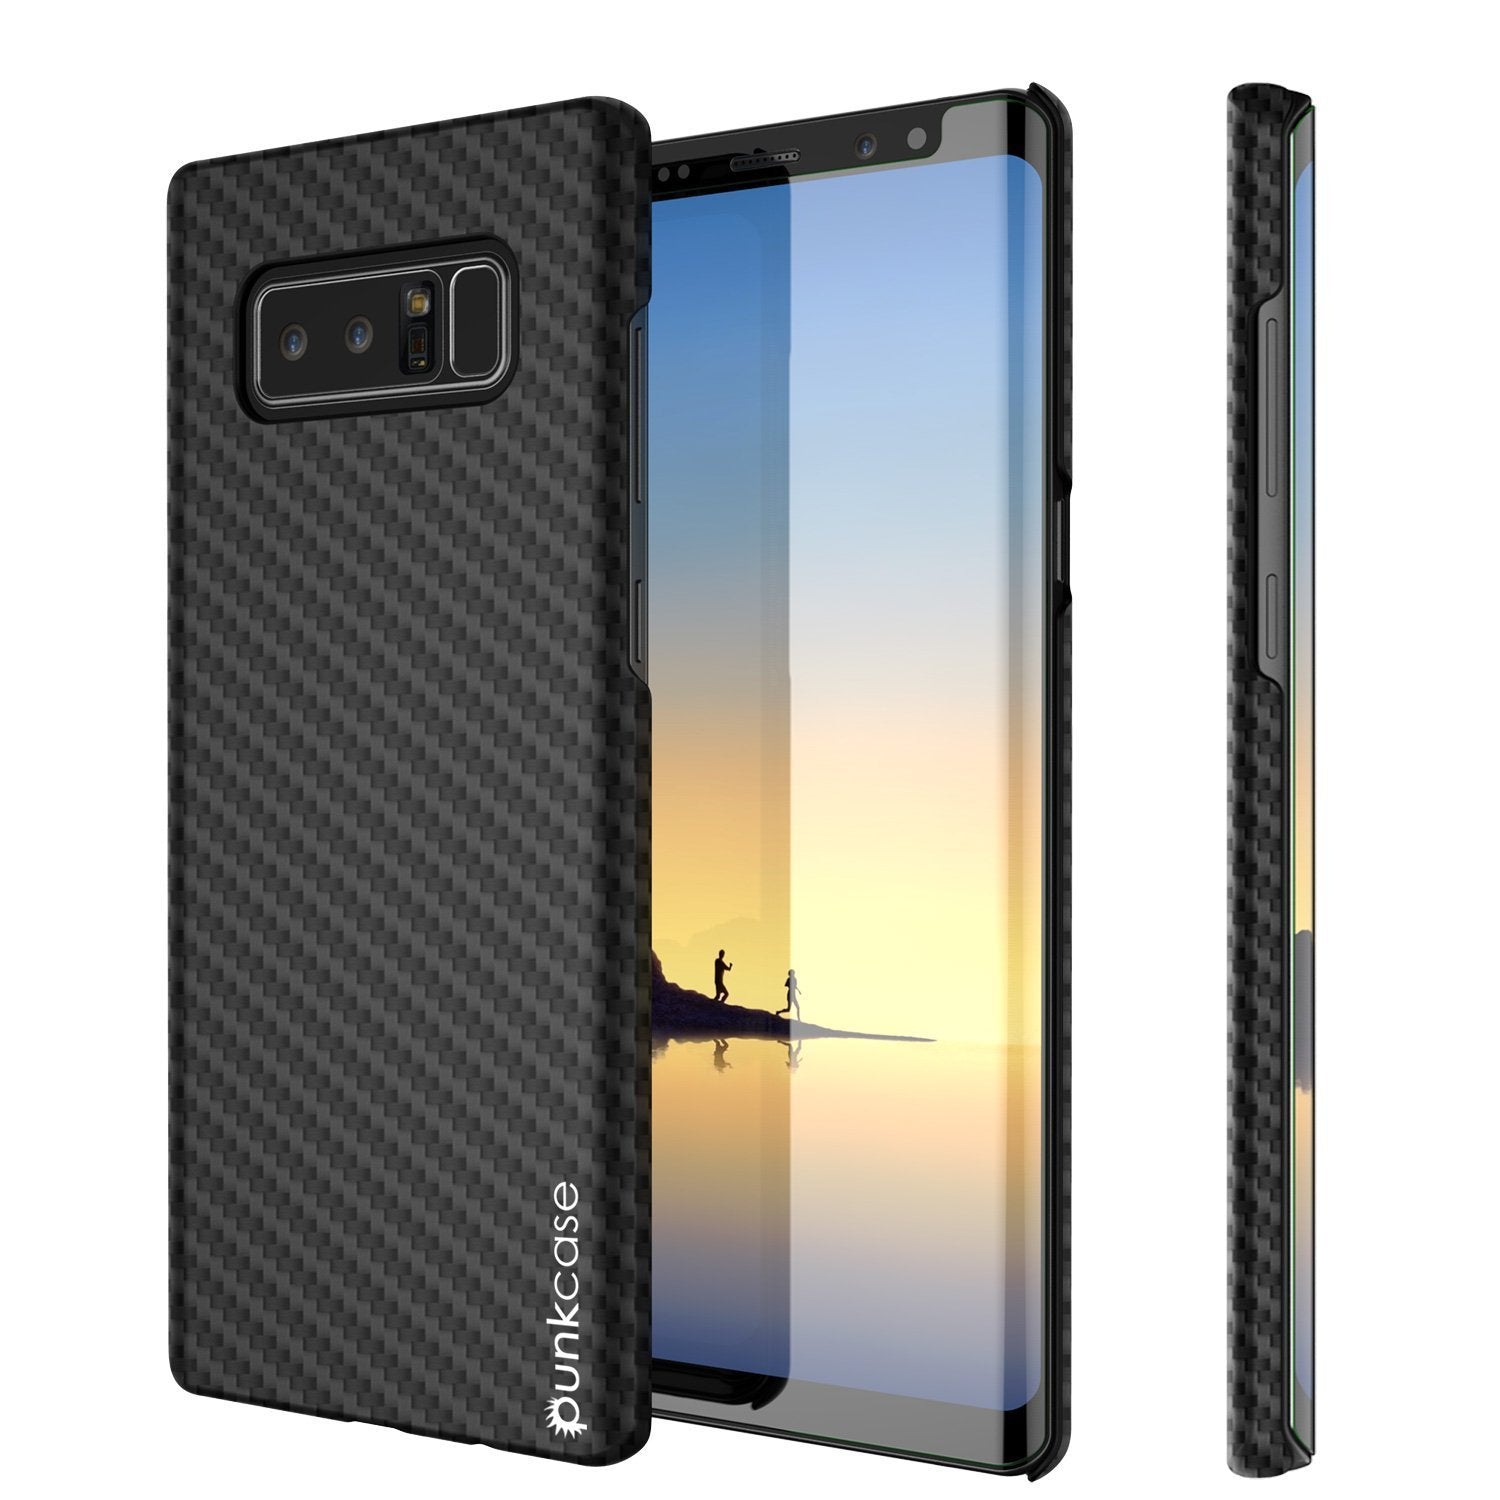 Galaxy Note 8 Case, Punkcase CarbonShield, Heavy Duty & Ultra Thin 2 Piece Dual Layer PU Leather Cover [shockproof][non slip] with PUNKSHIELD Screen Protector for Samsung Note 8 [jet black]